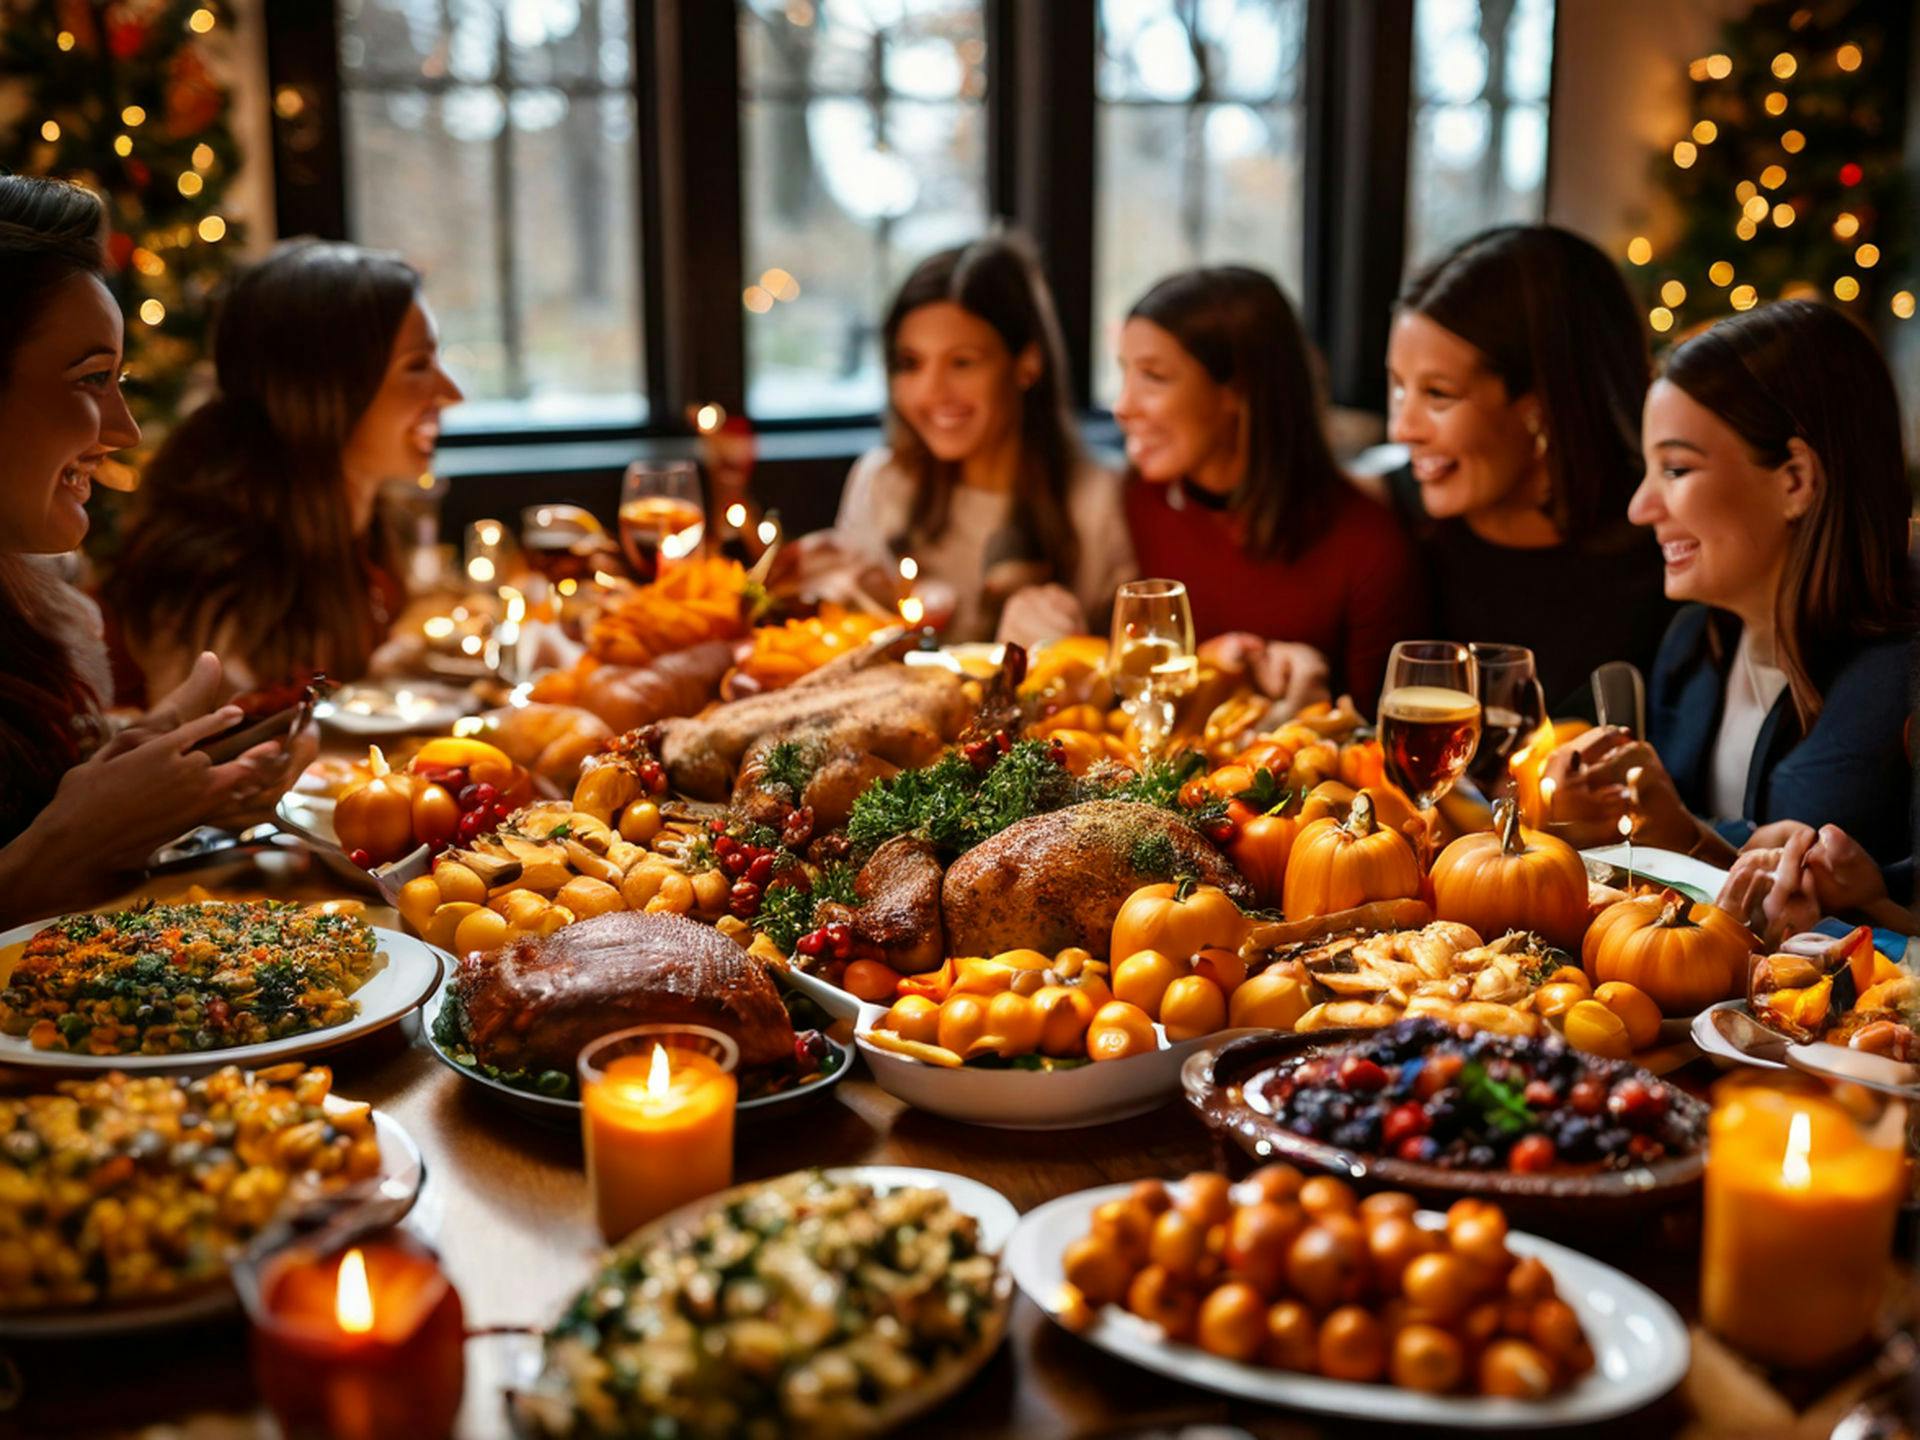 Thanksgiving Dinner Spread with Family Gathering Around the Table